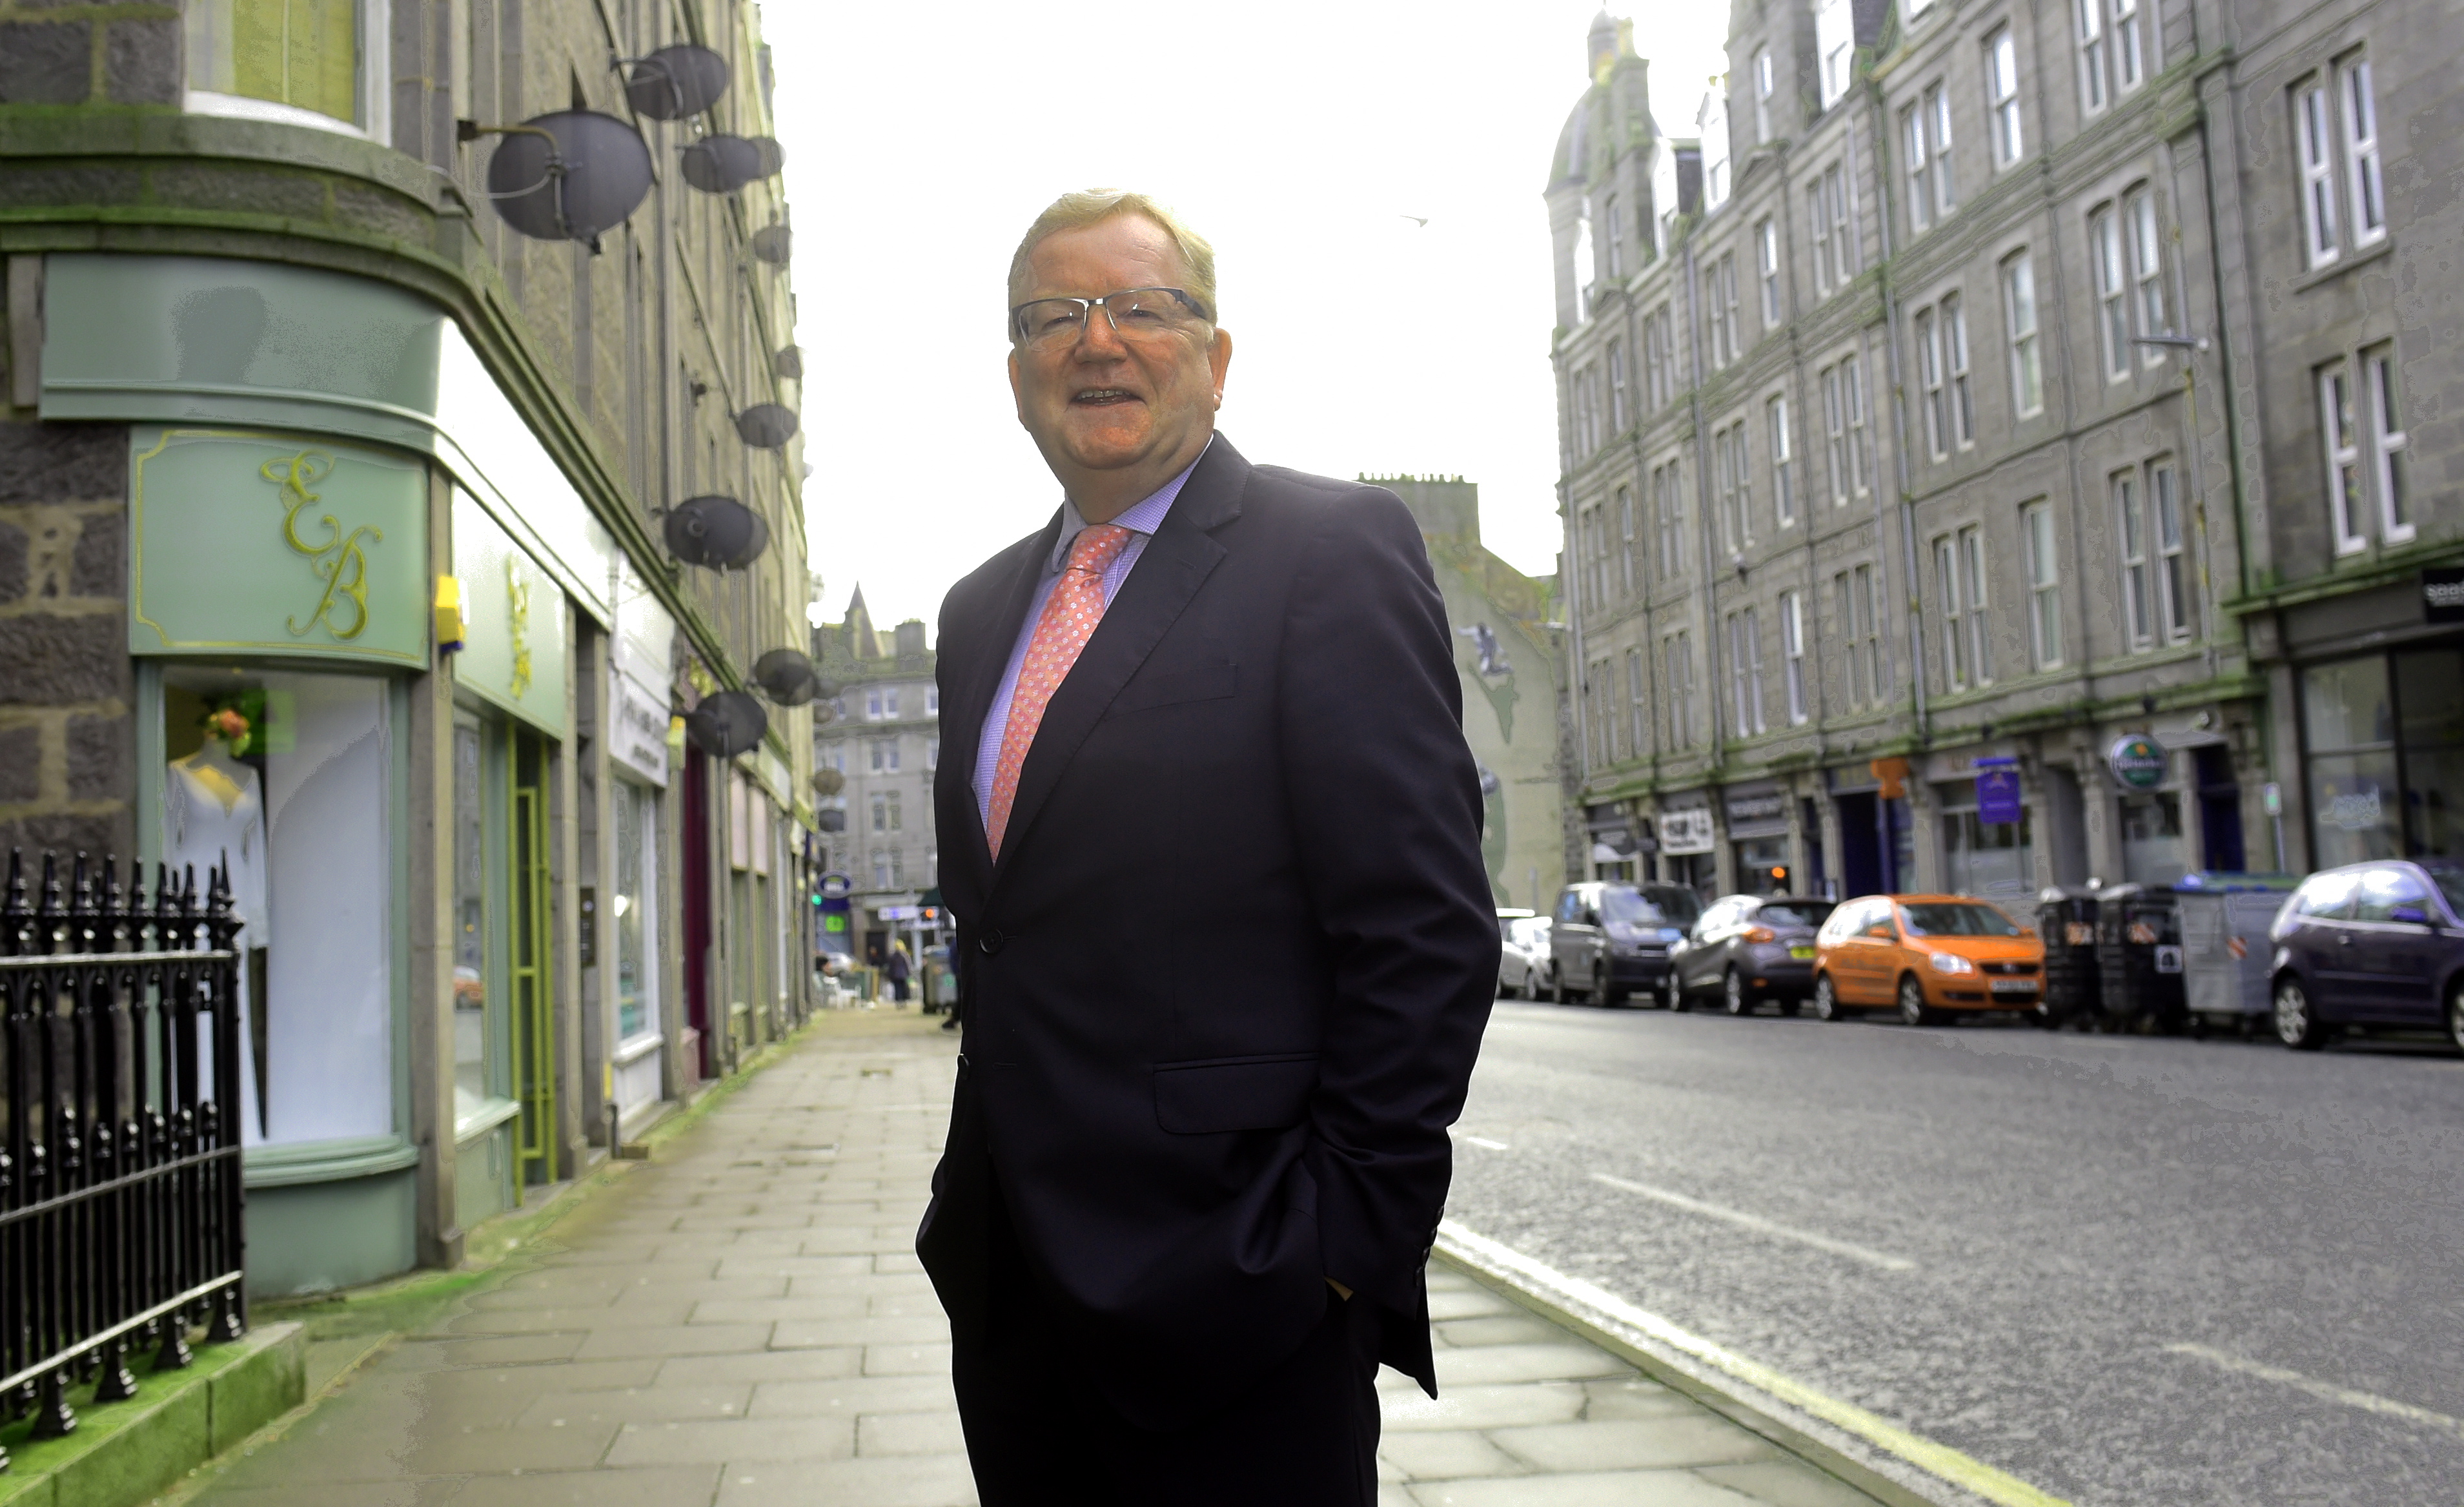 Interim Conservative leader, Jackson Carlaw visiting Aberdeen to discuss business rates with industry bosses.
Picture by Jim Irvine.